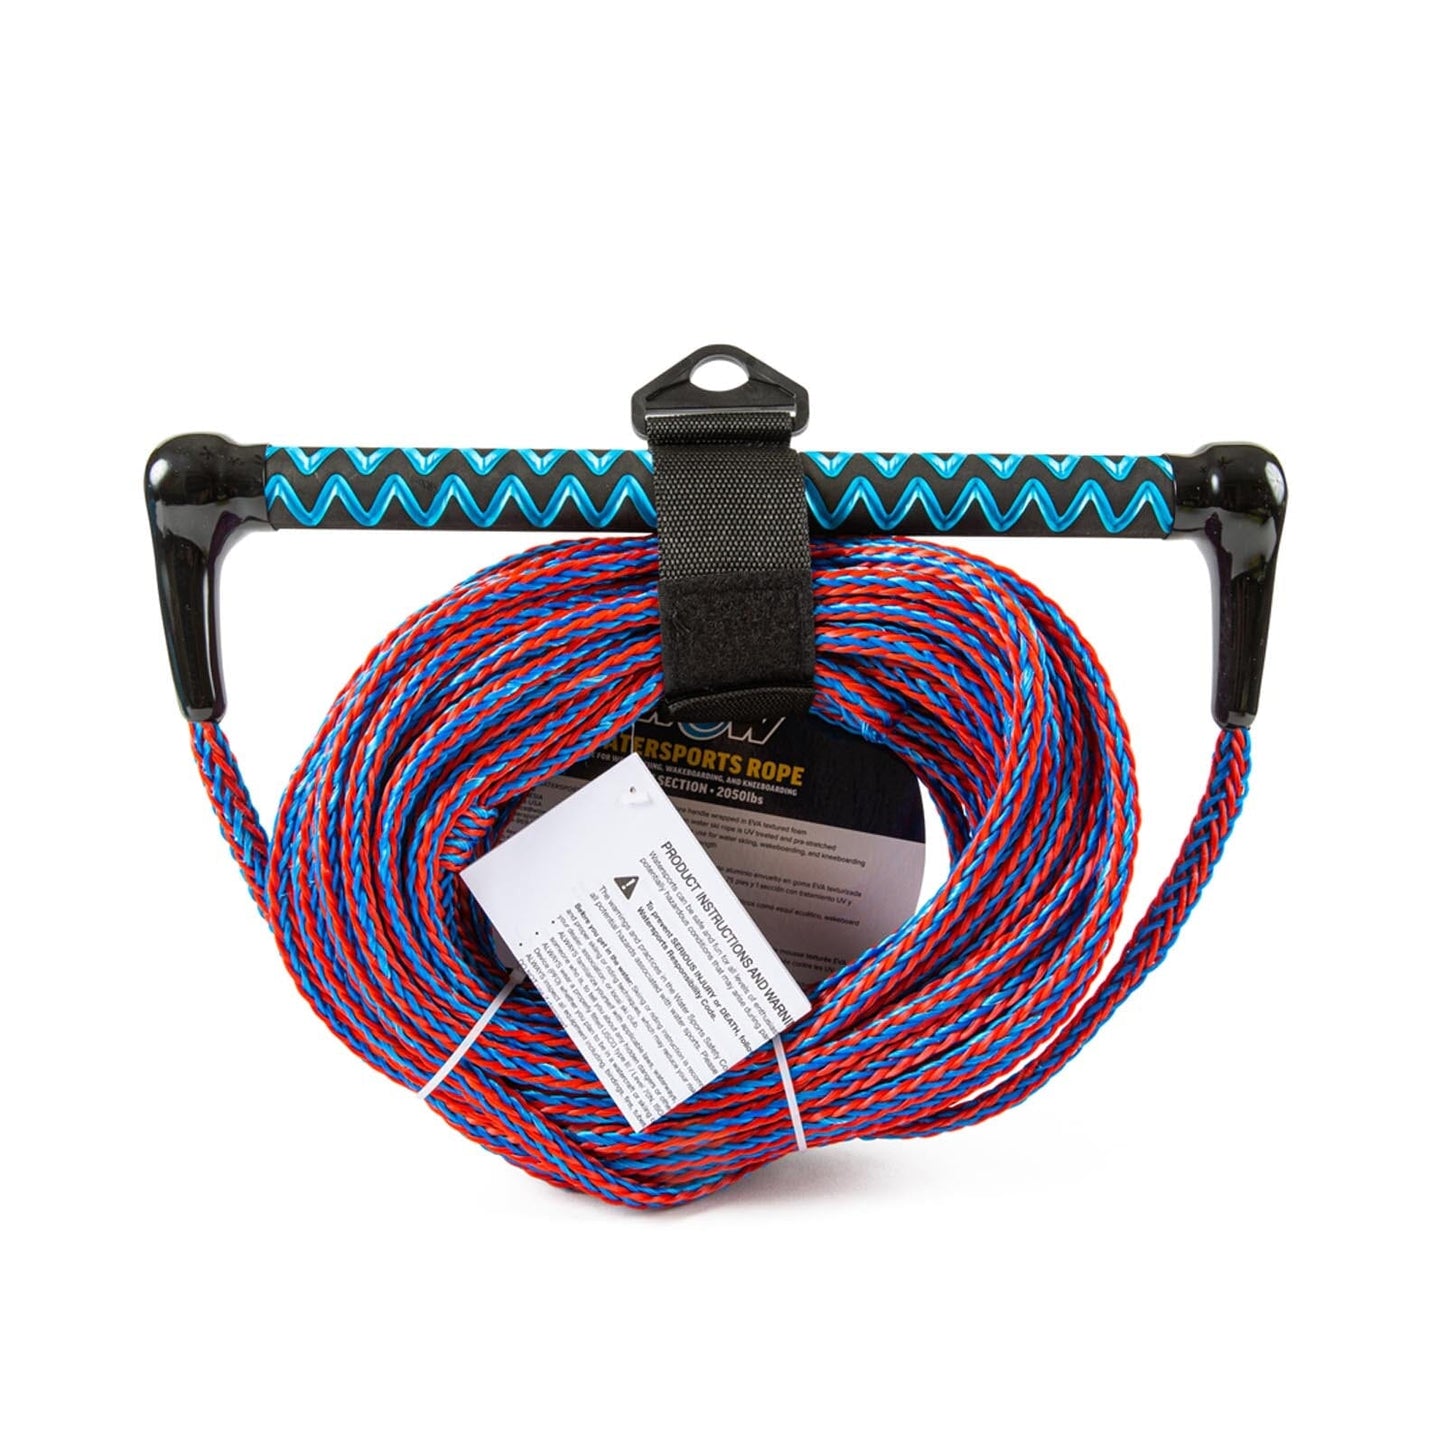 75' Watersports Tow Rope with EVA Handle